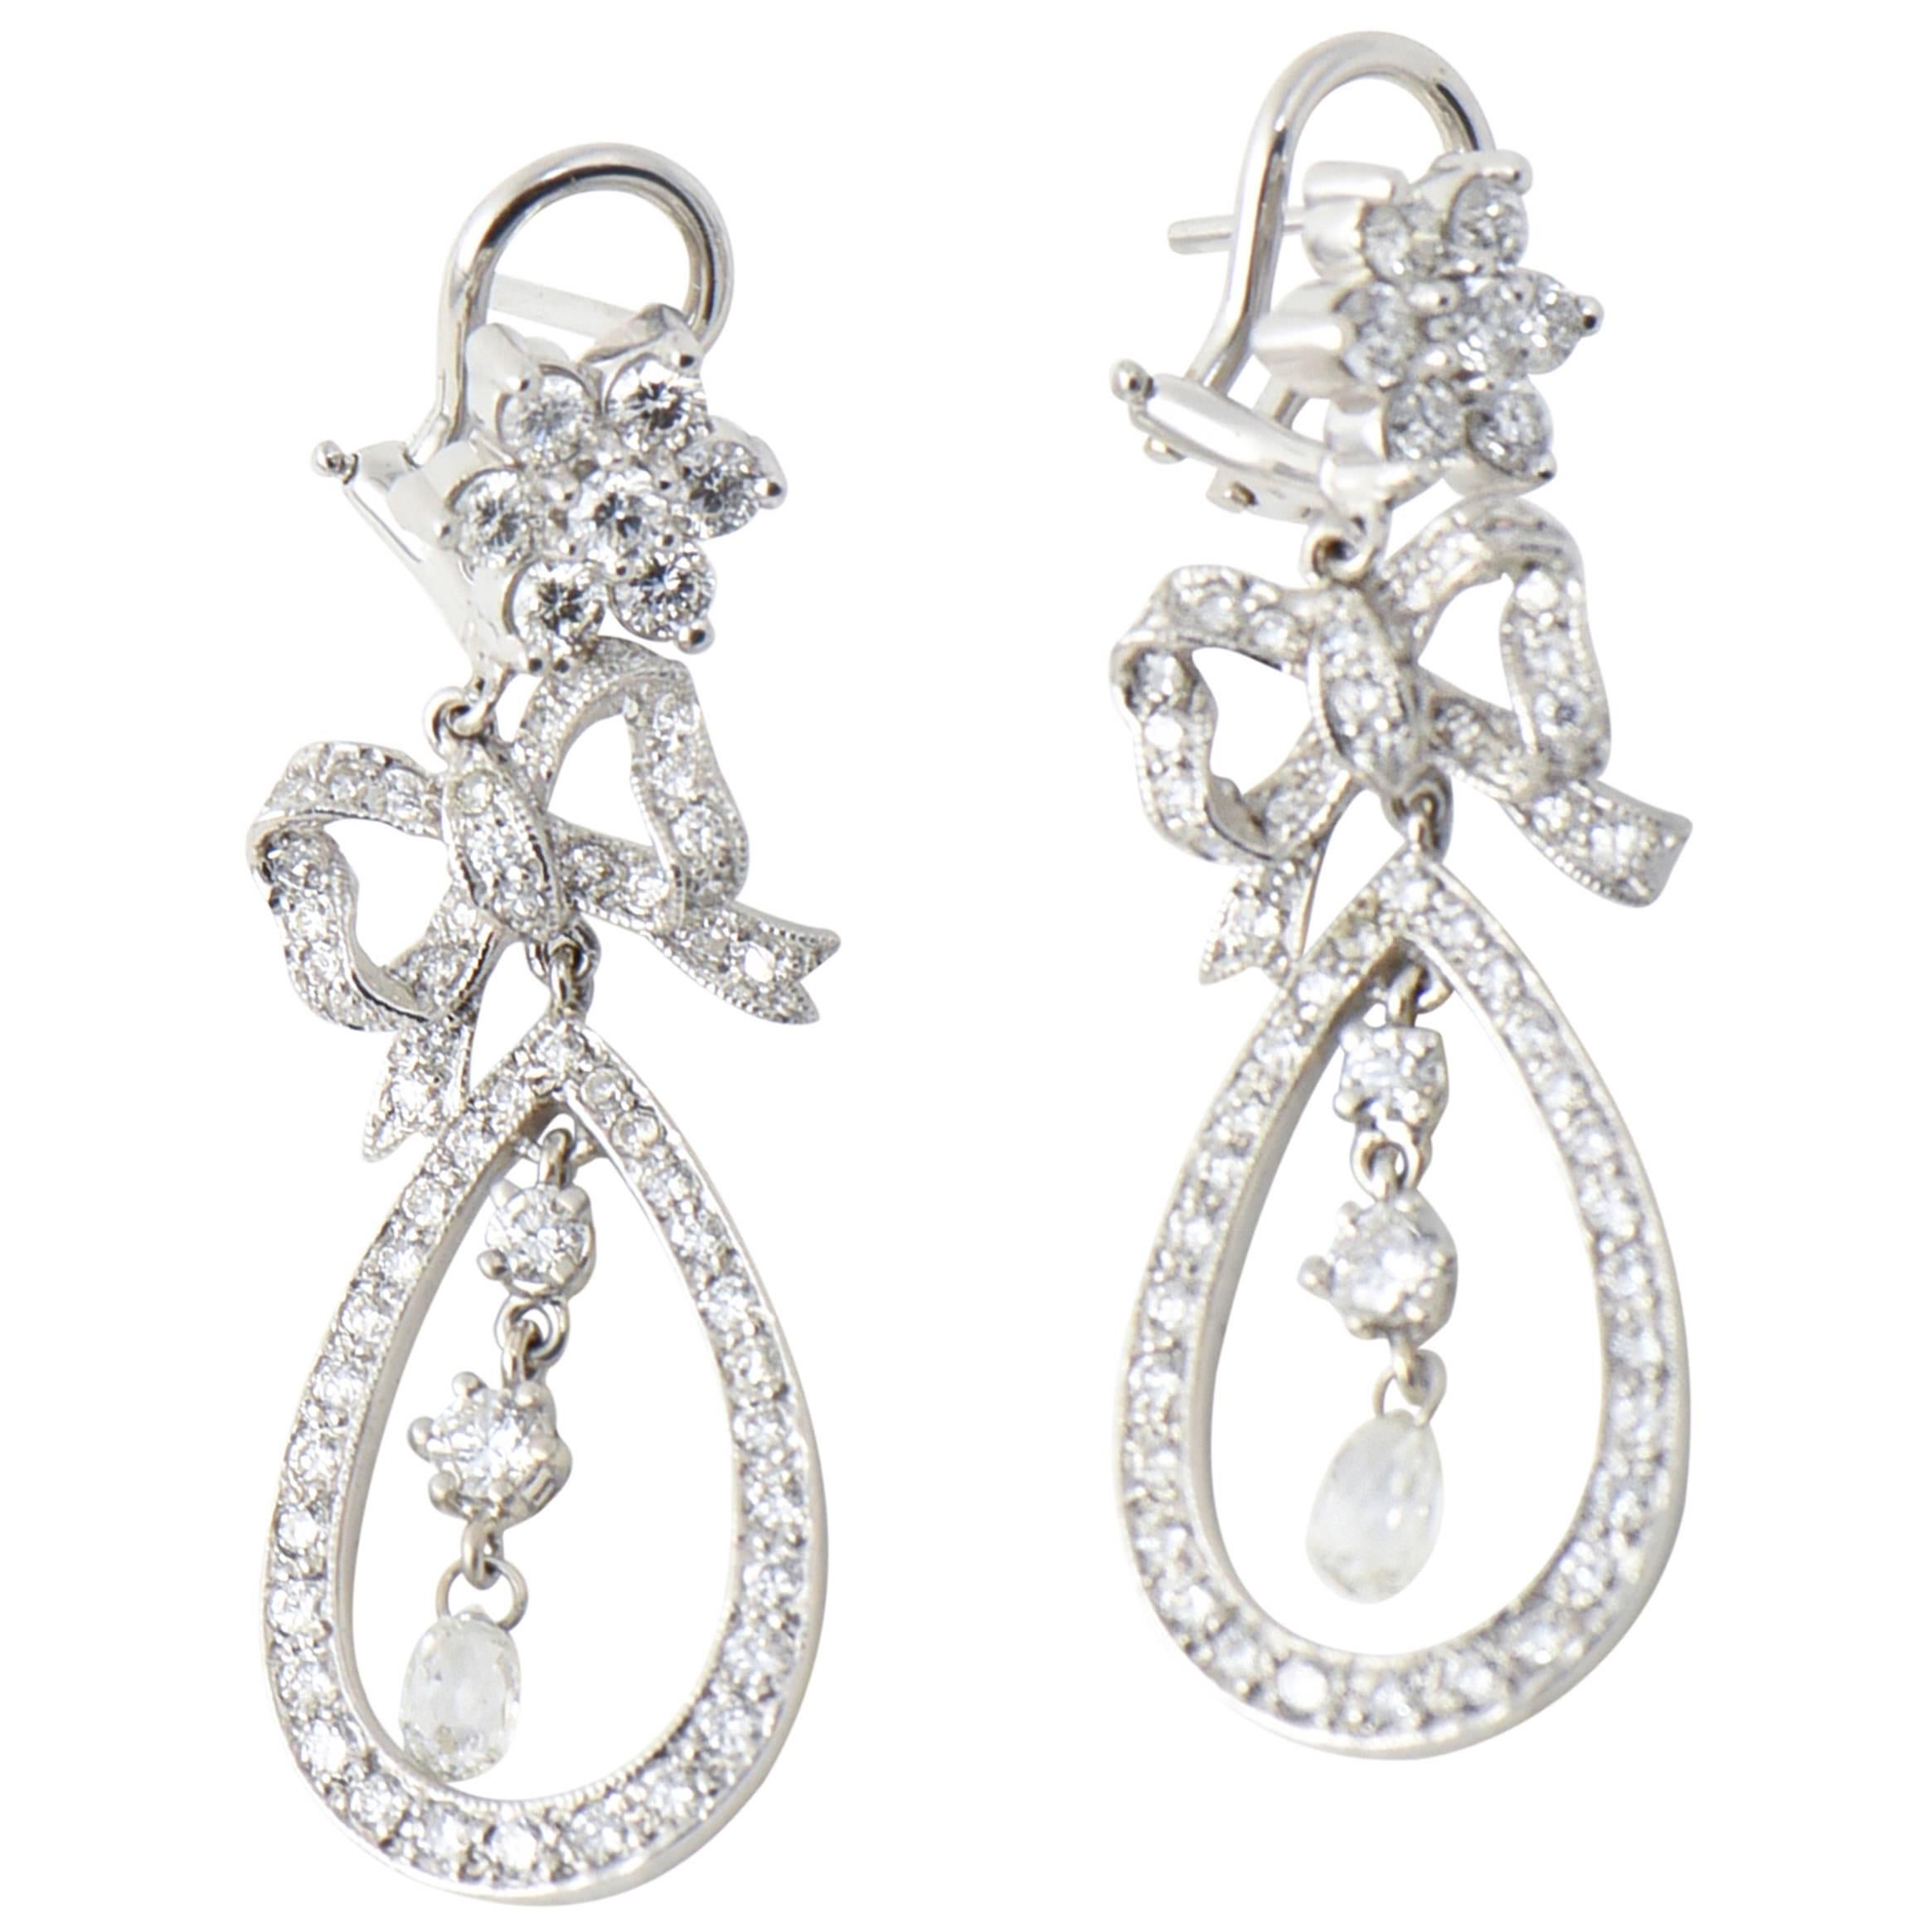 Belle Époque Style Diamond Bow and Flower Dangling White Gold Earrings